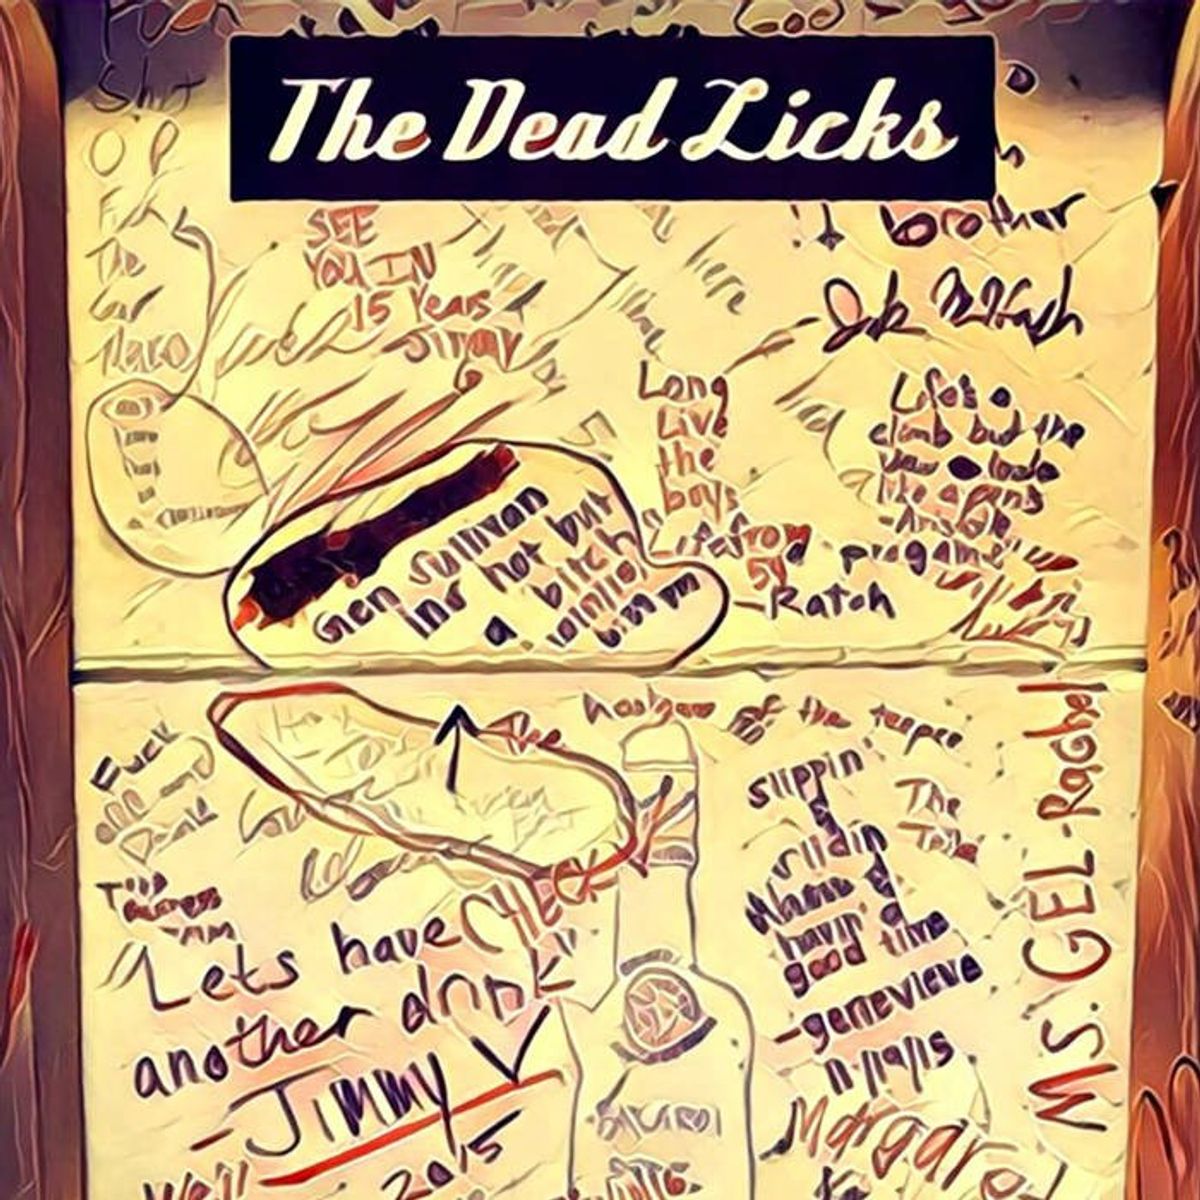 Review: The Dead Licks' Debut EP